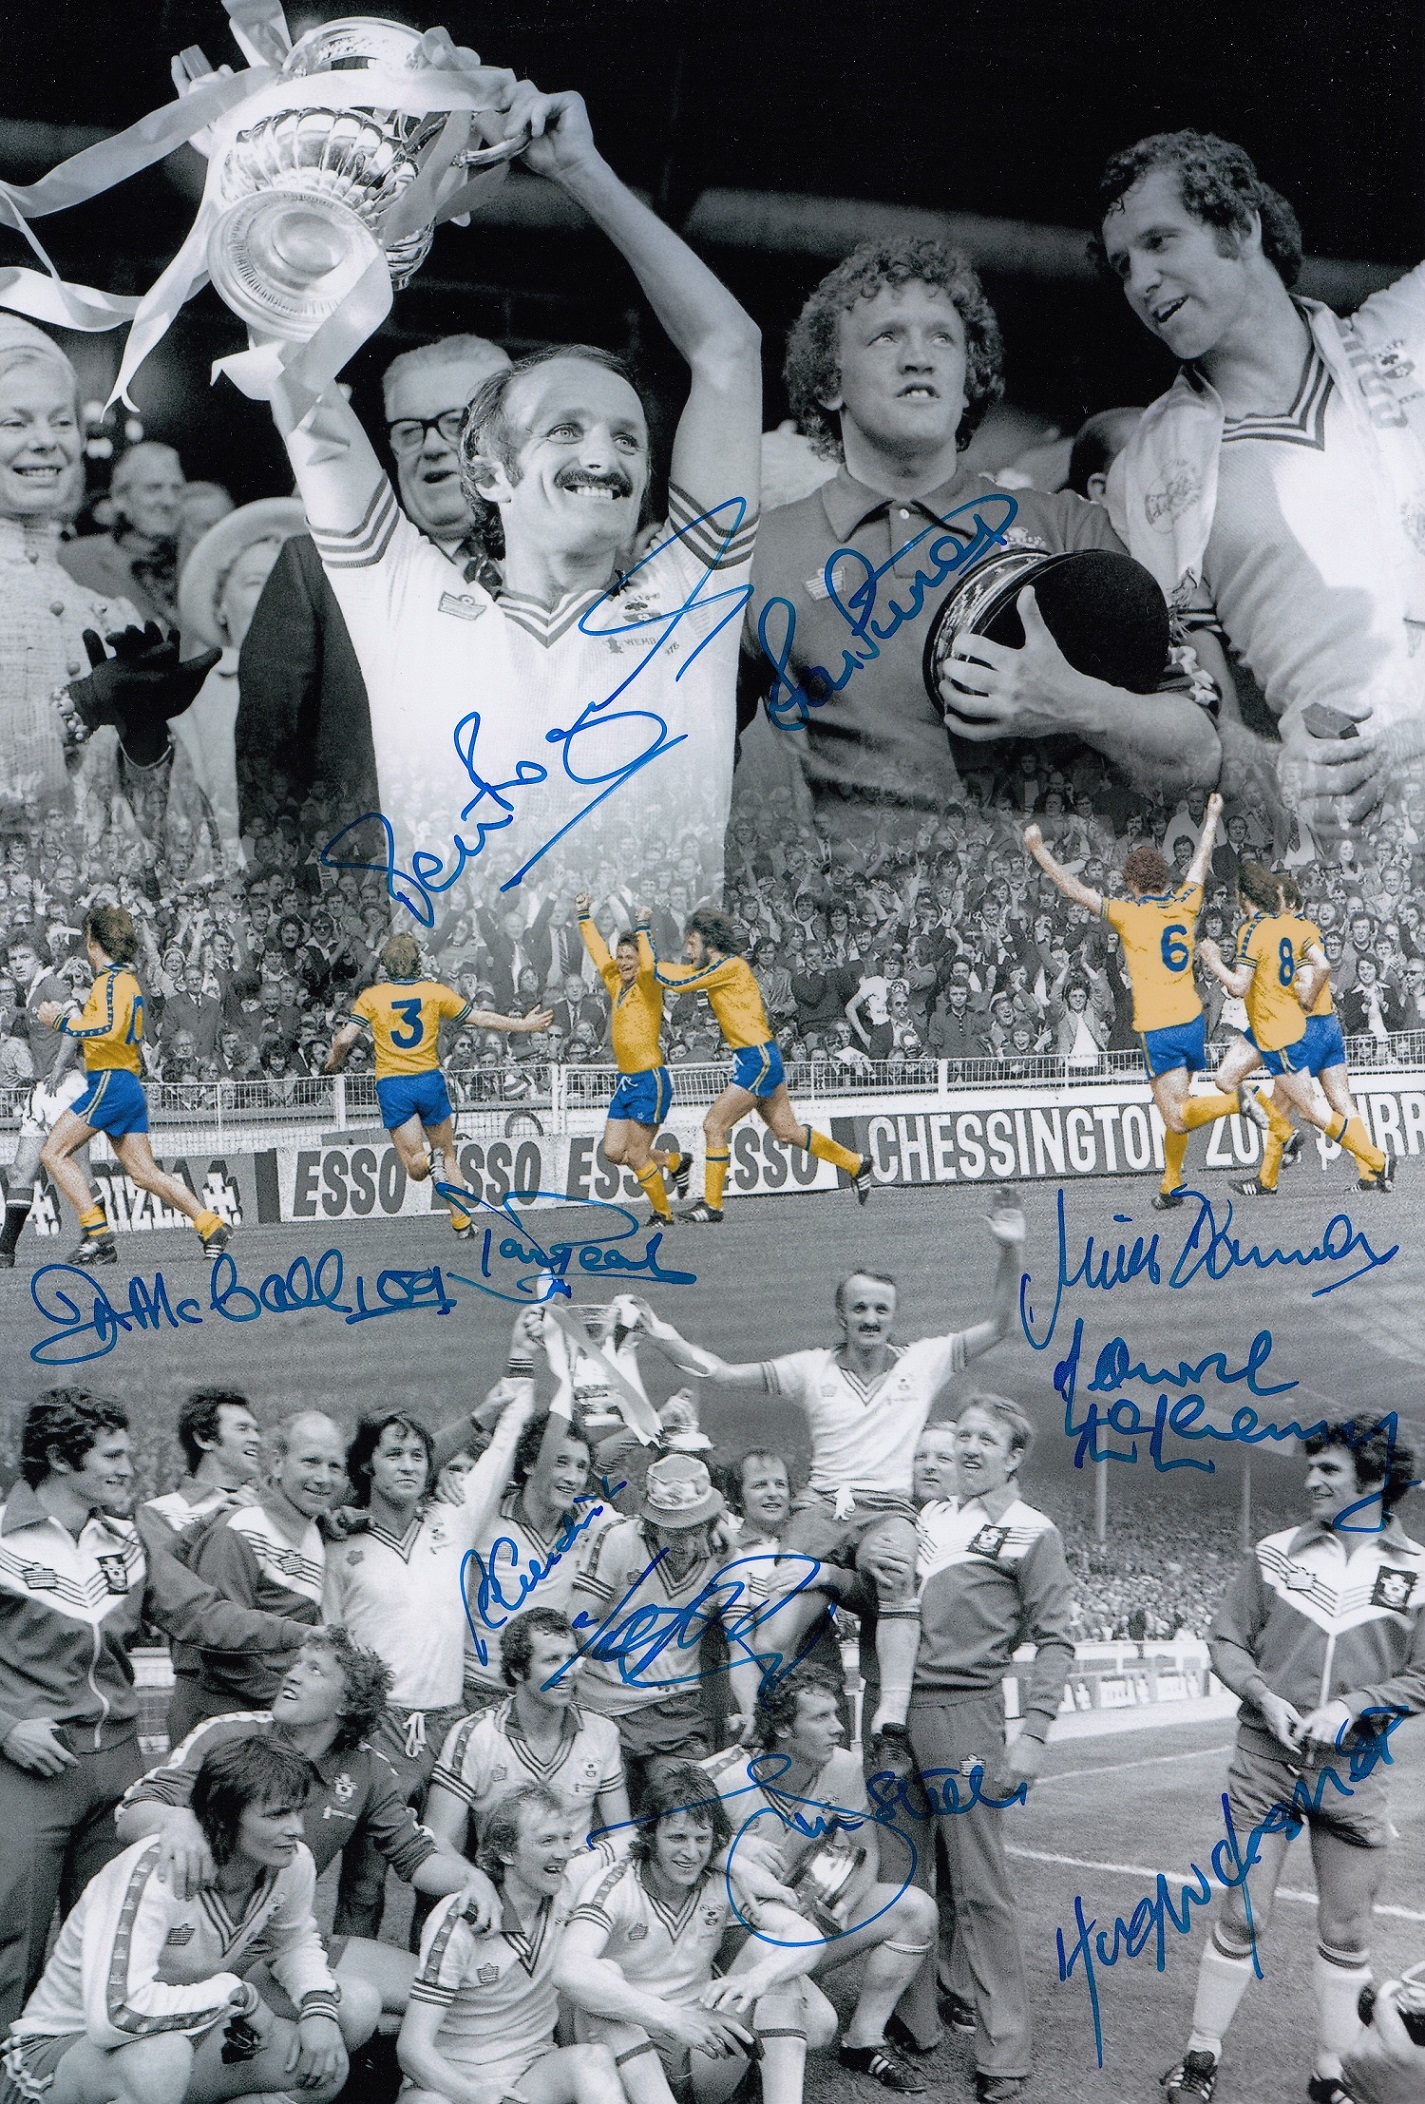 Football Autographed SOUTHAMPTON 1976 photo, a superb montage of images depicting the Saints 1976 FA